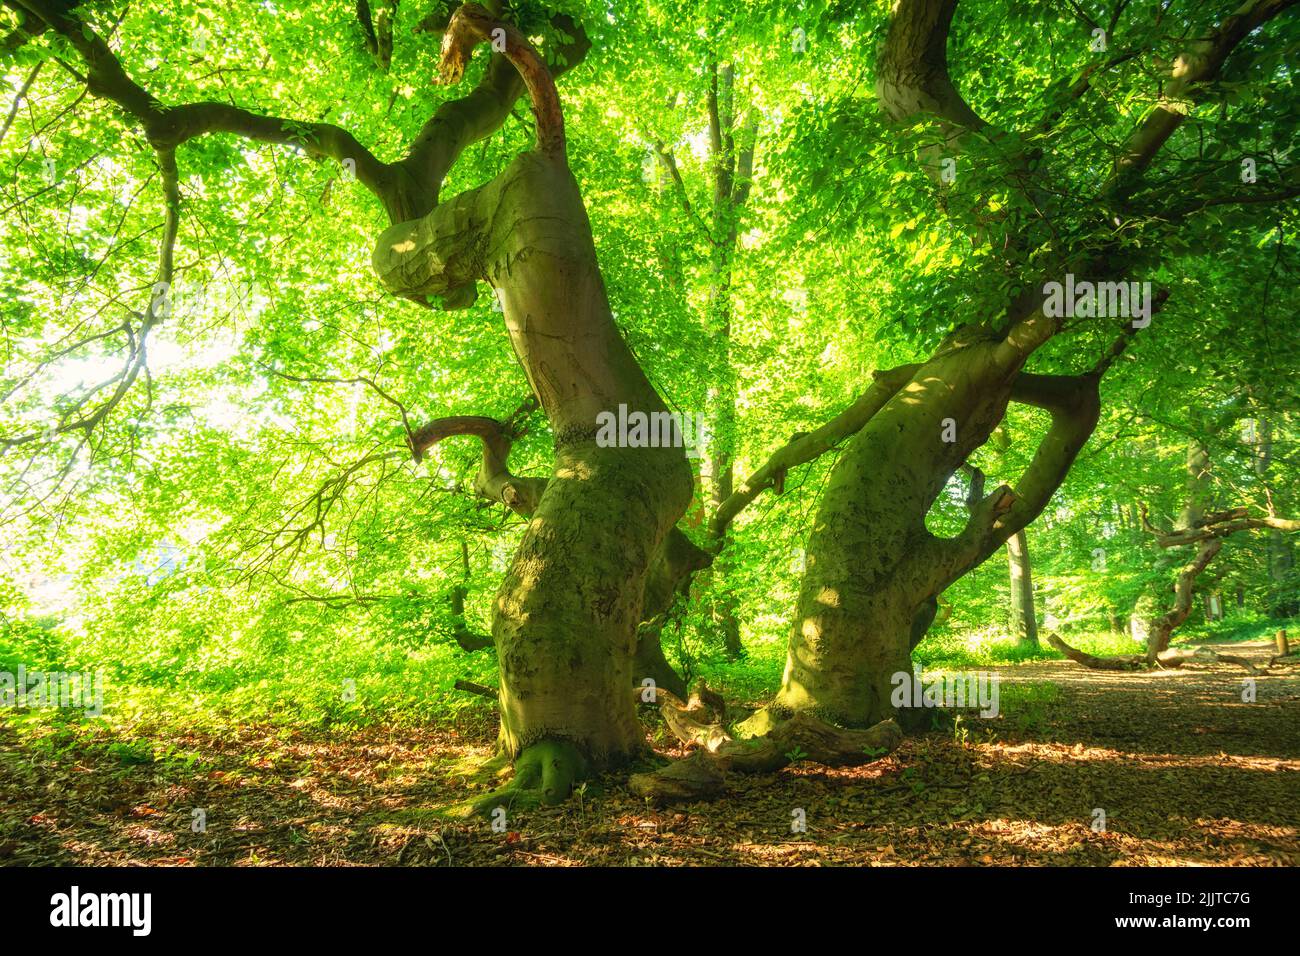 Big old Süntel beeches in a green forest Stock Photo